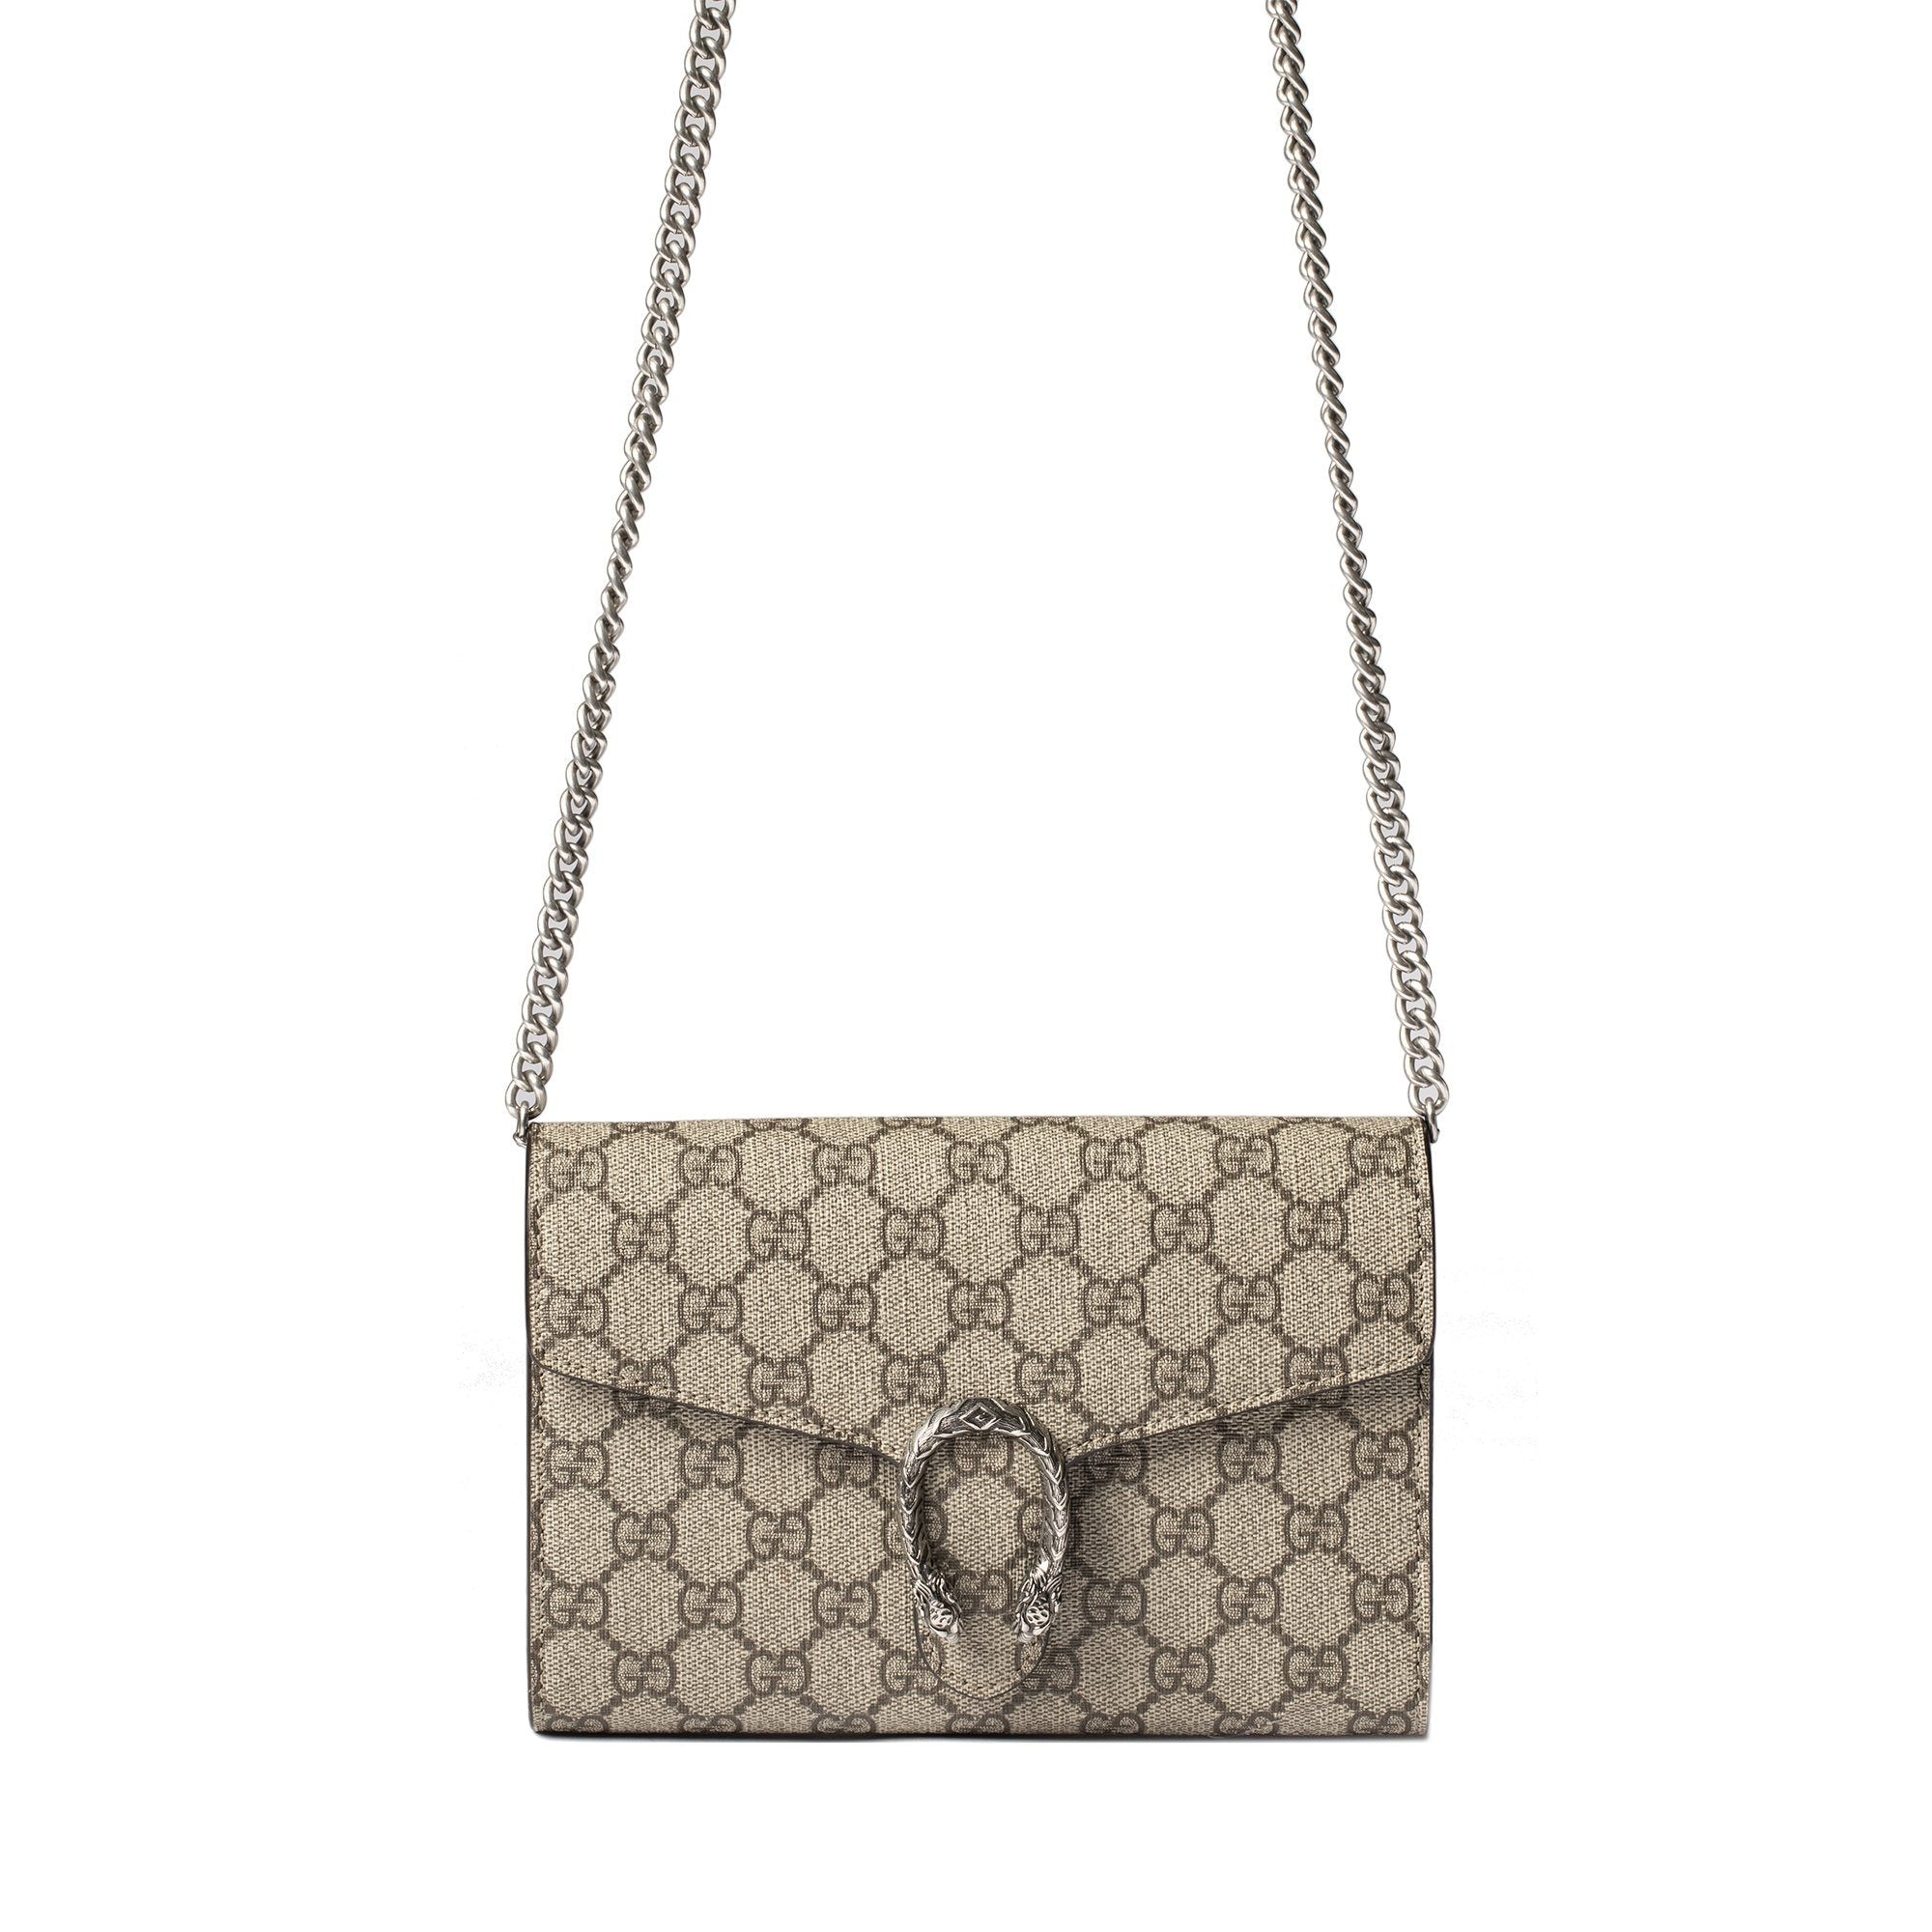 Gucci Dionysus GG Supreme Wallet on Chain– Oliver Jewellery